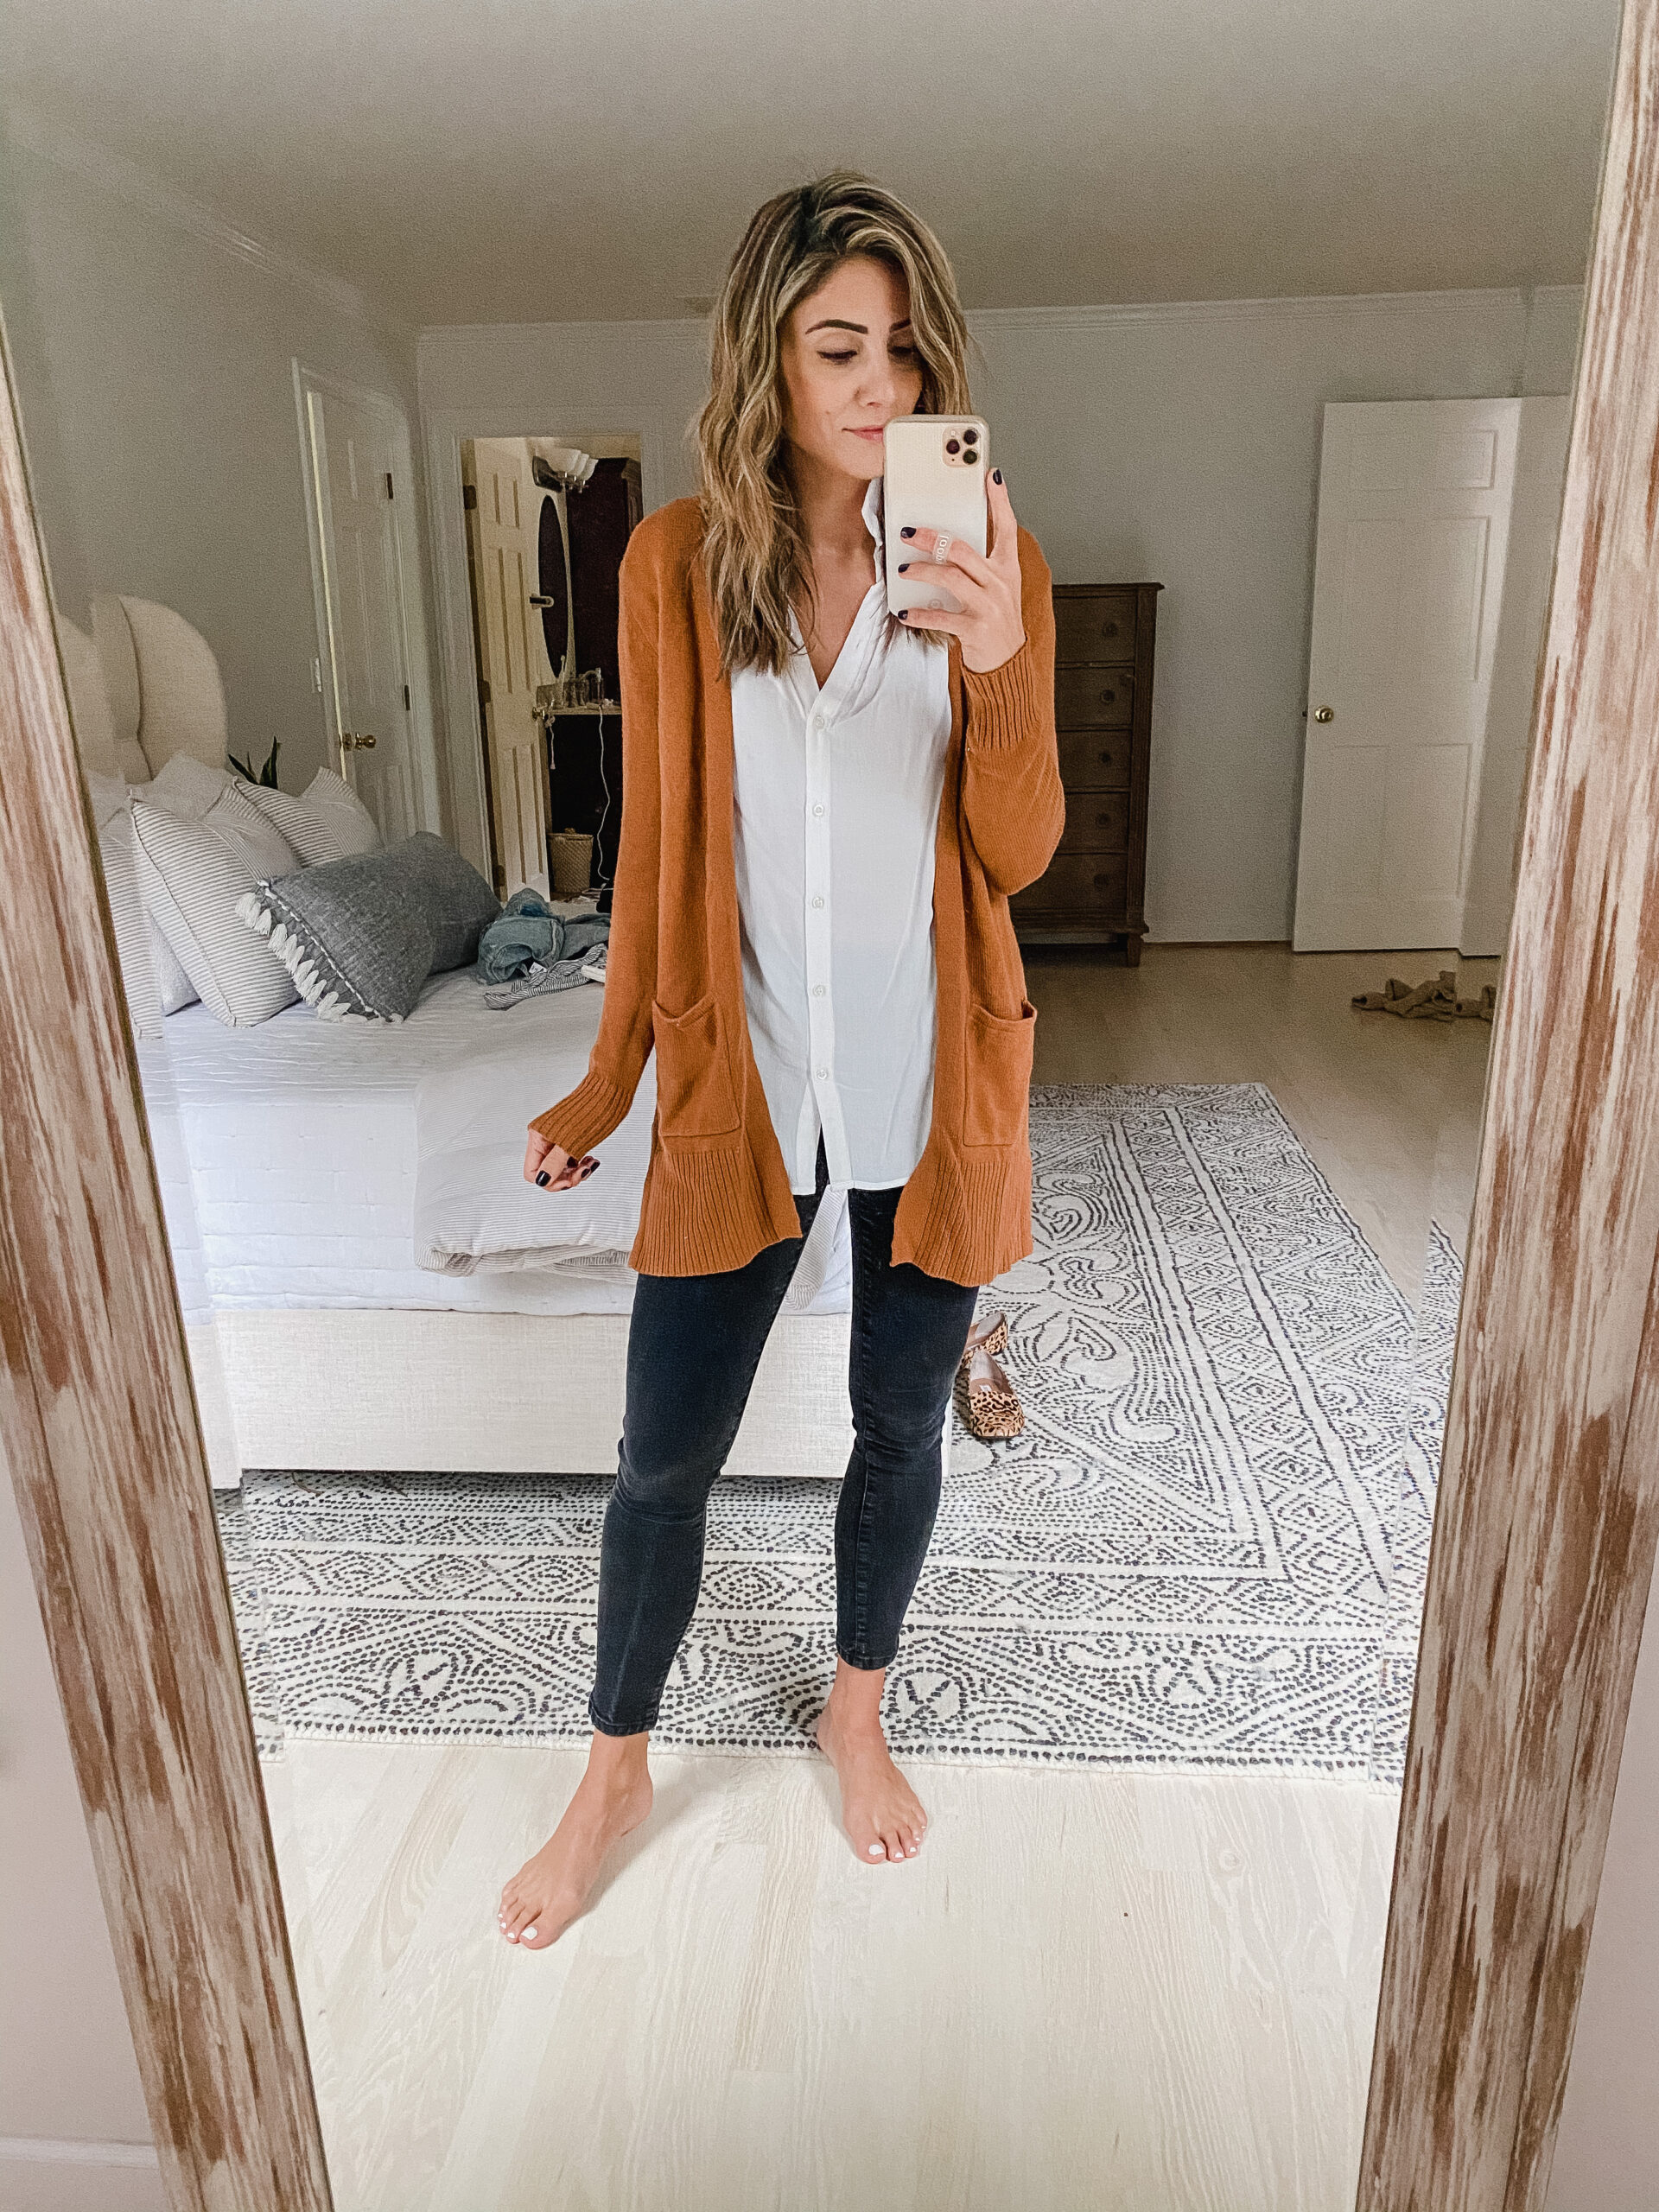 Connecticut life and style blogger Lauren McBride shares her October Old Navy picks featuring fall basics and cozy sweaters.